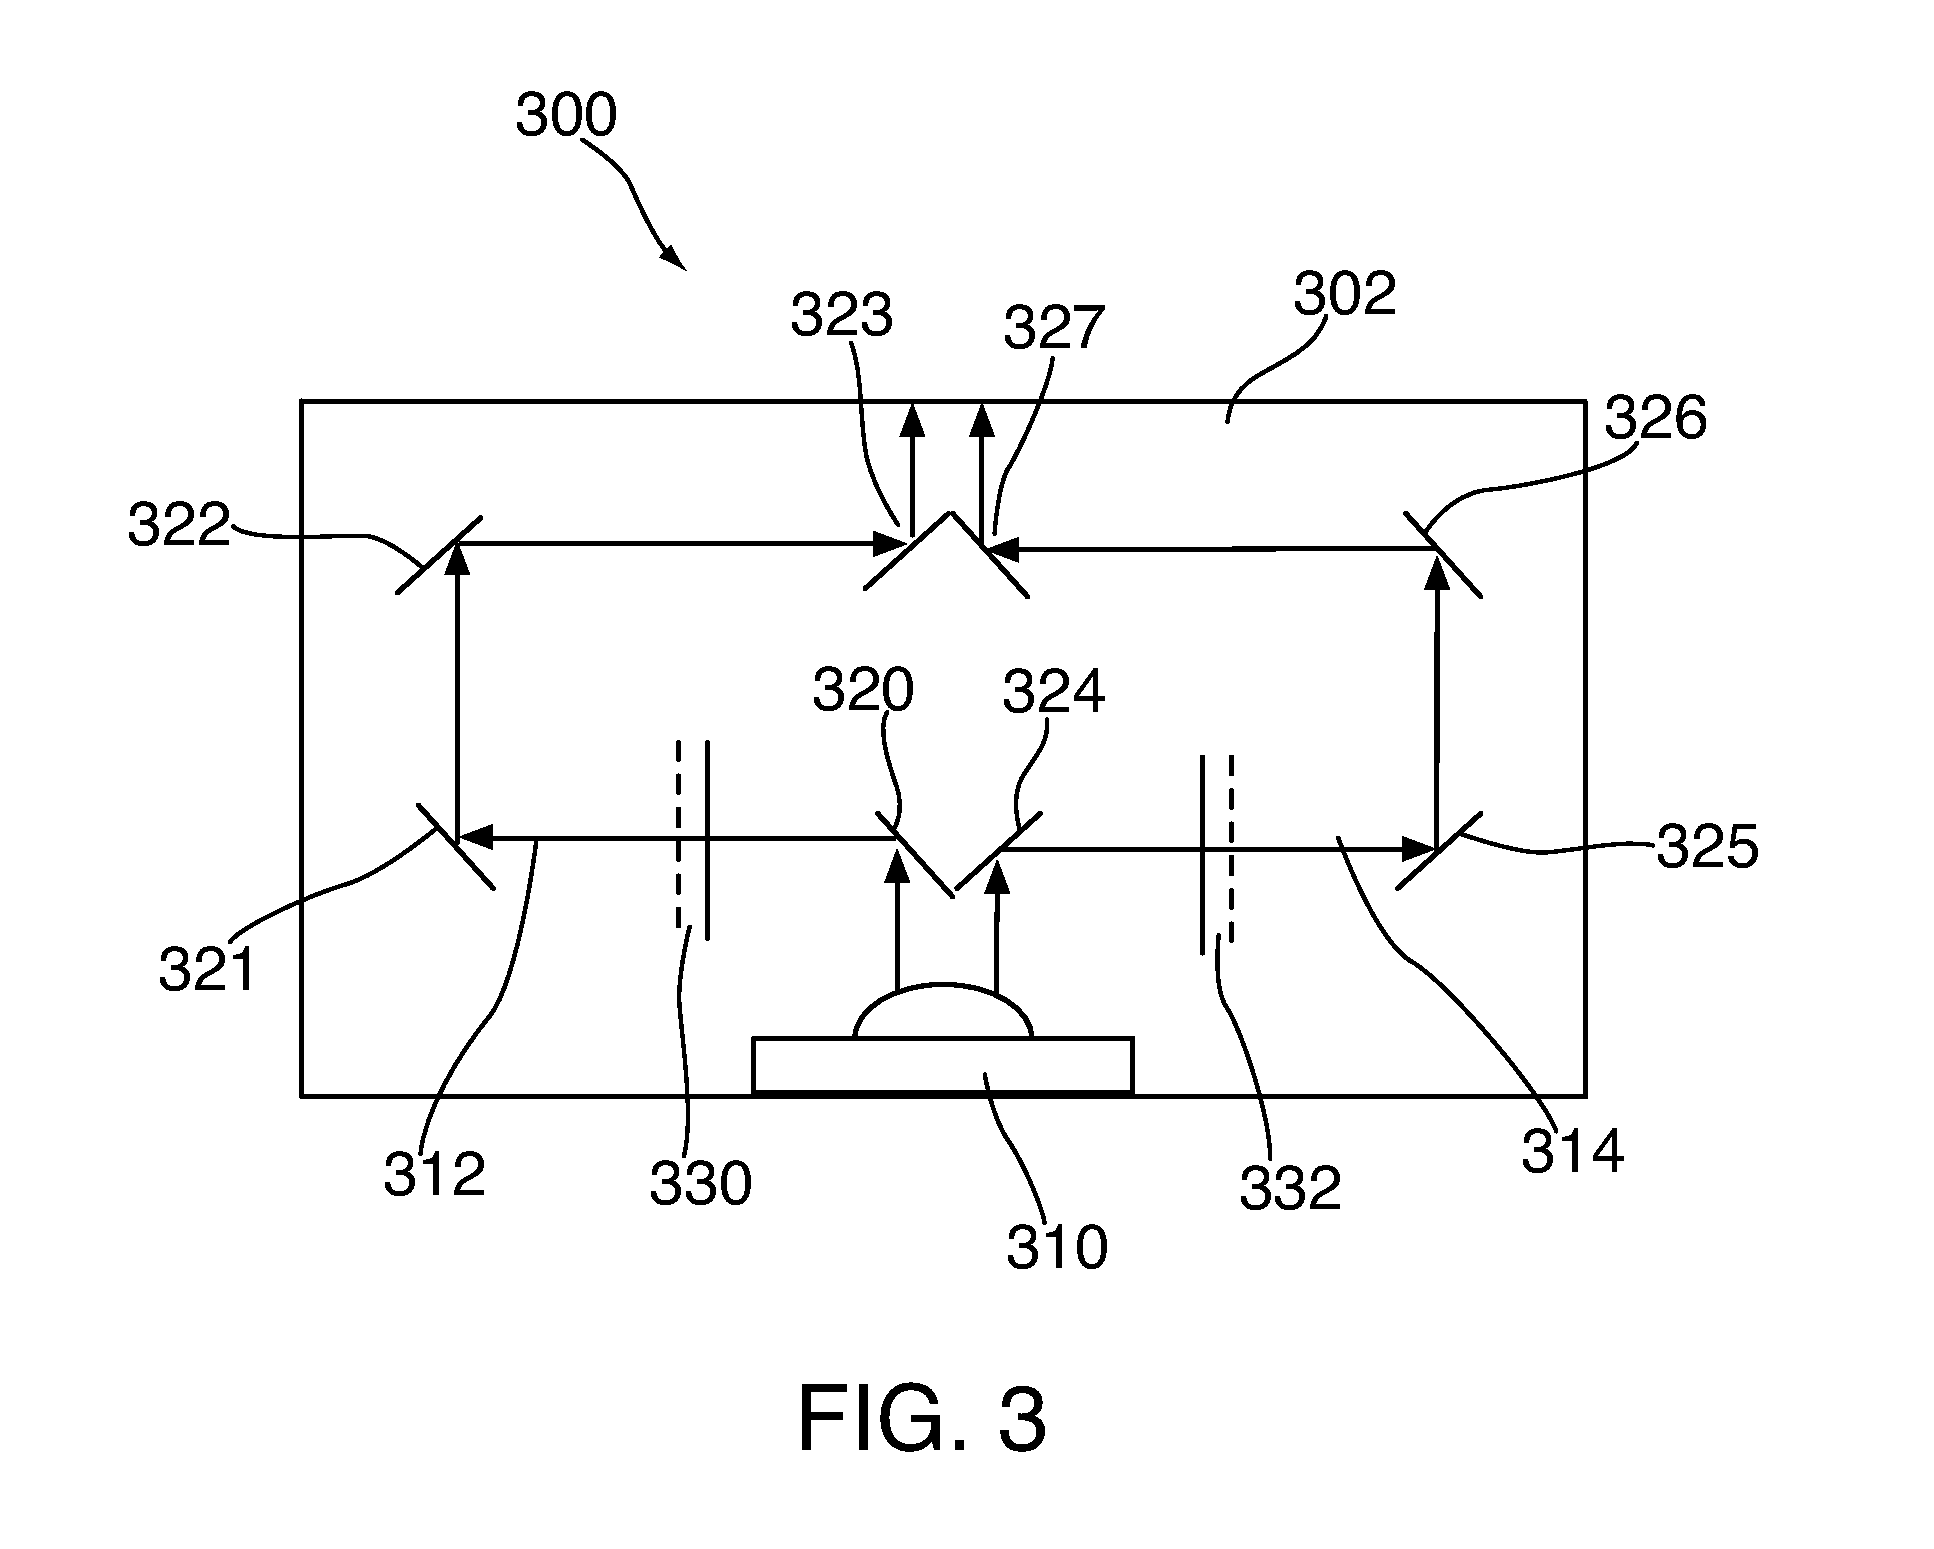 Obfuscating the display of information and removing the obfuscation using a filter